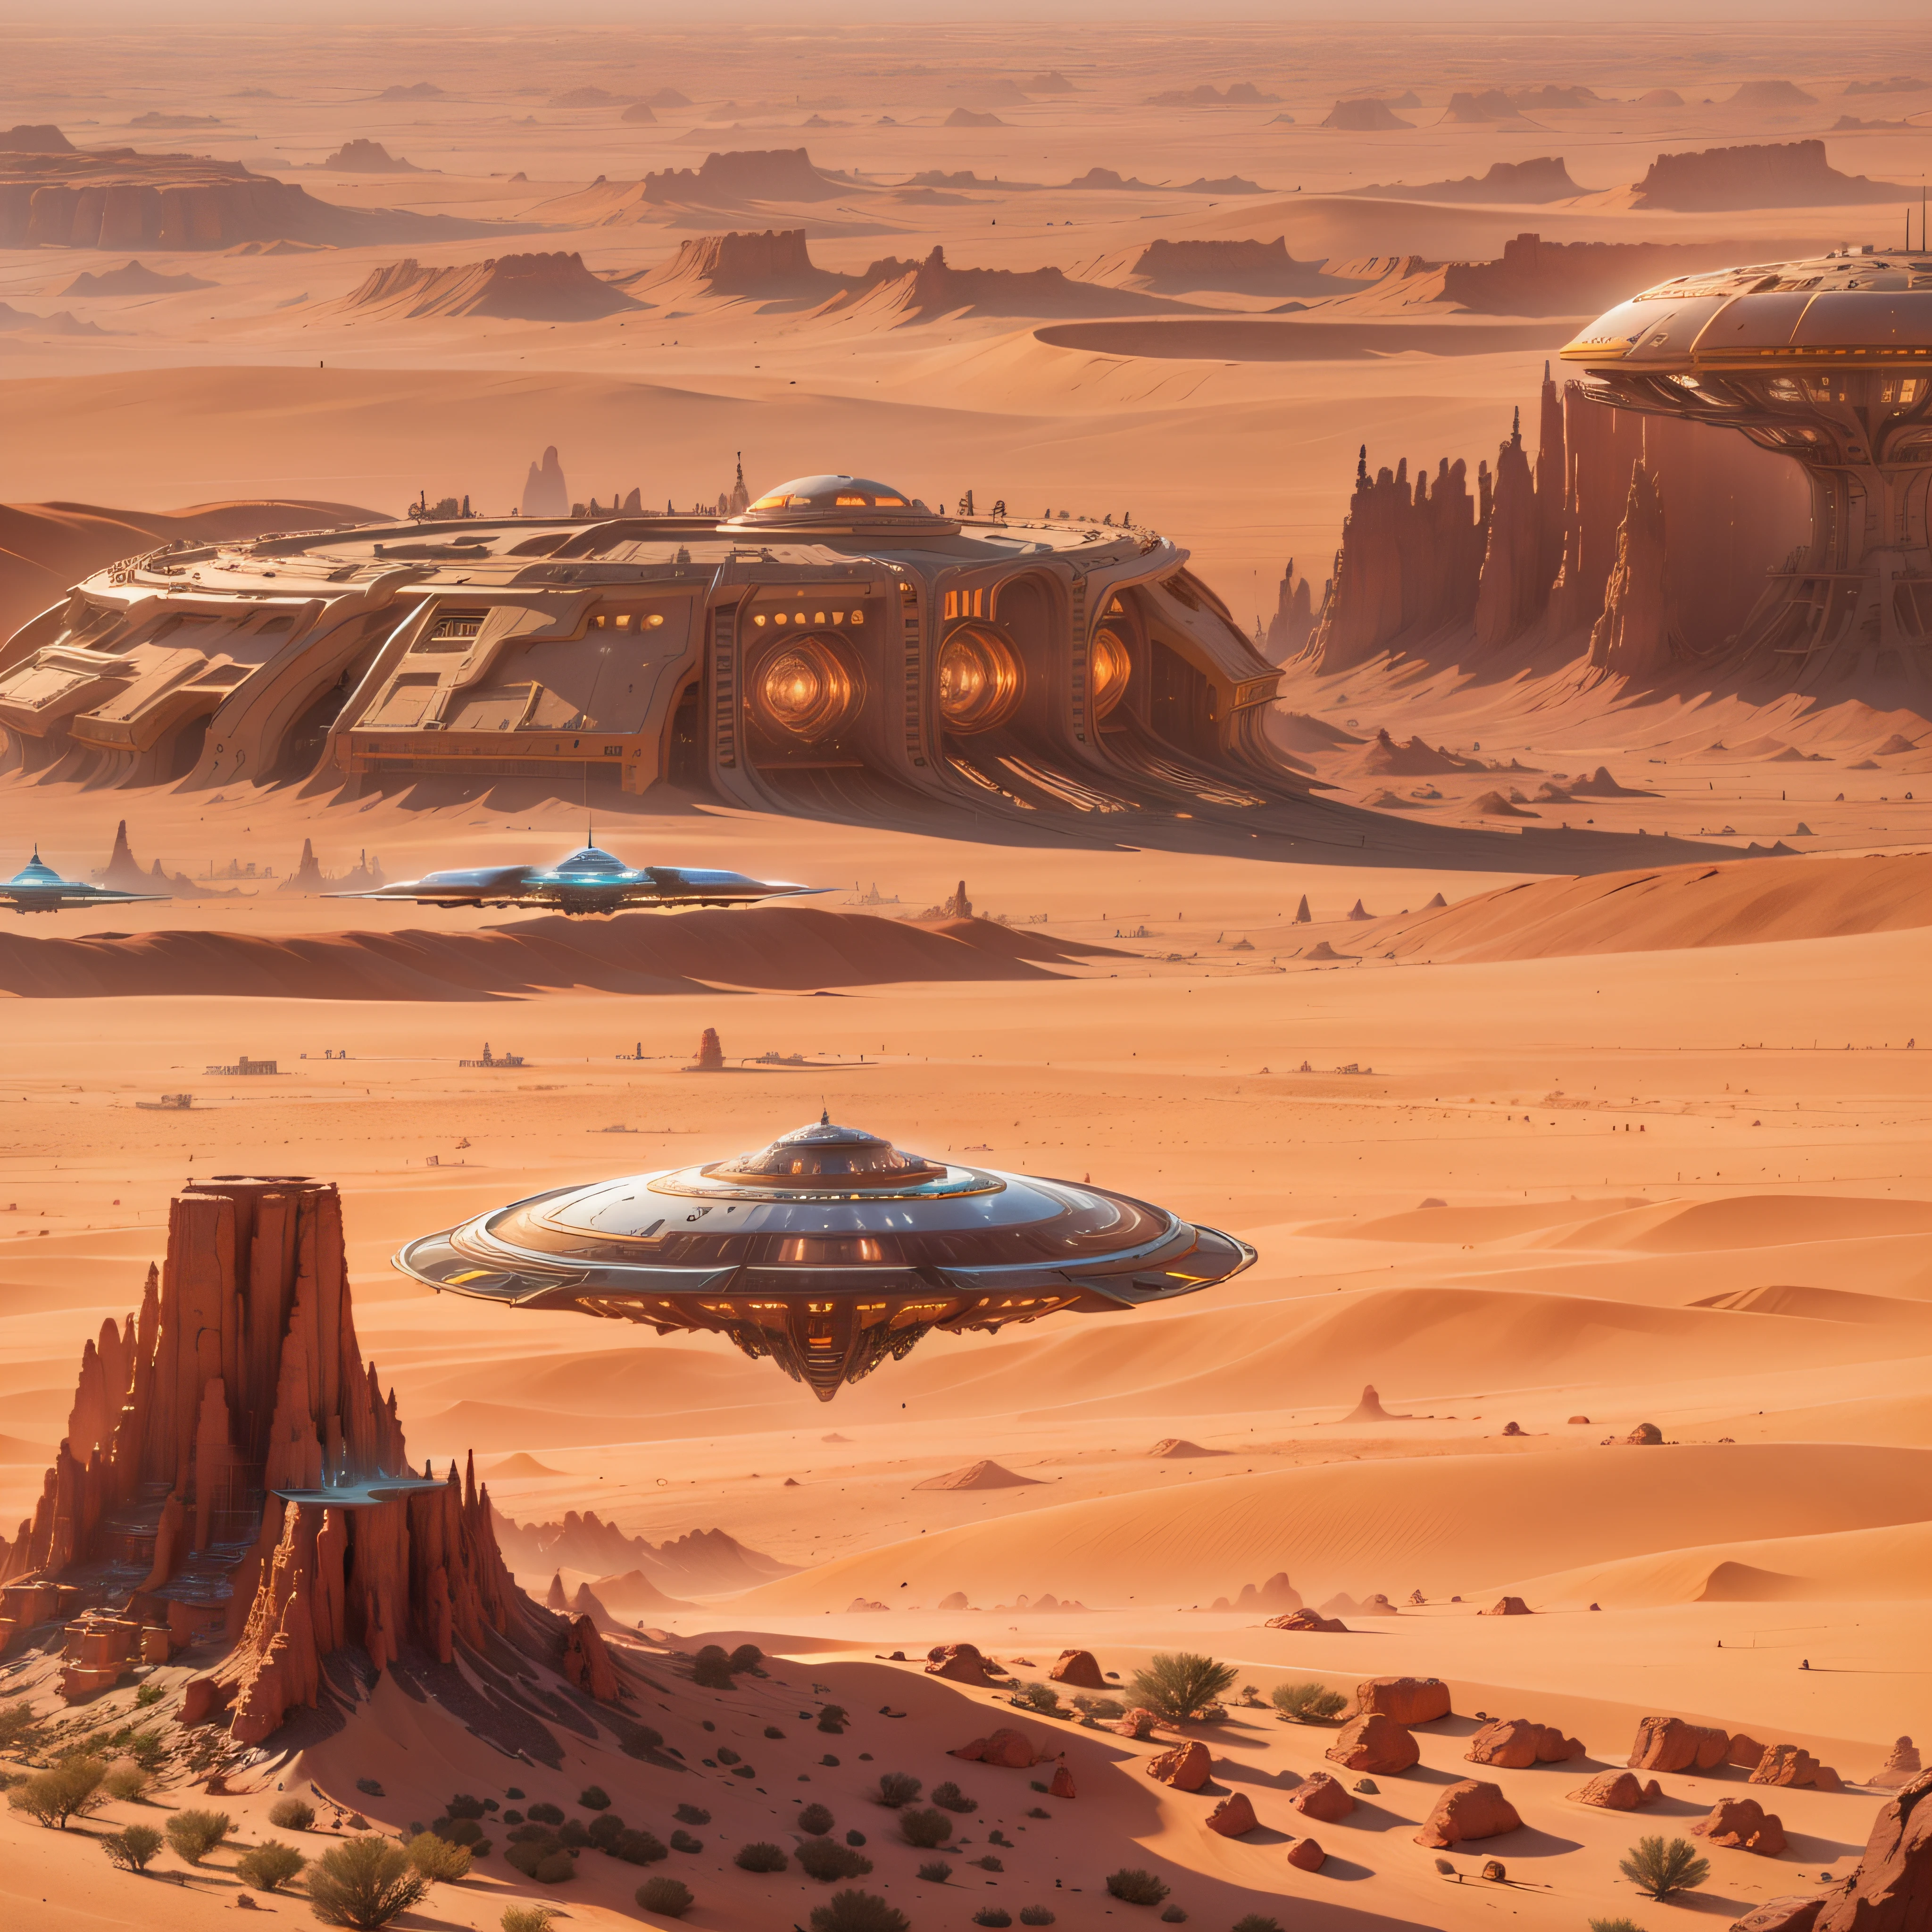 spaceship flying over a desert area with a desert in the foreground, spaceship flies into the distance, utopian space ship, floating vehicles, an intact ancient alien ship, flying scifi vehicle, spaceship from the movie dune, ufo landing, spaceship in background, futuristic starship, science fiction spacecraft, ancient space ship, flying vehicles, alien starship, of a ufo propulsion system, flying saucer